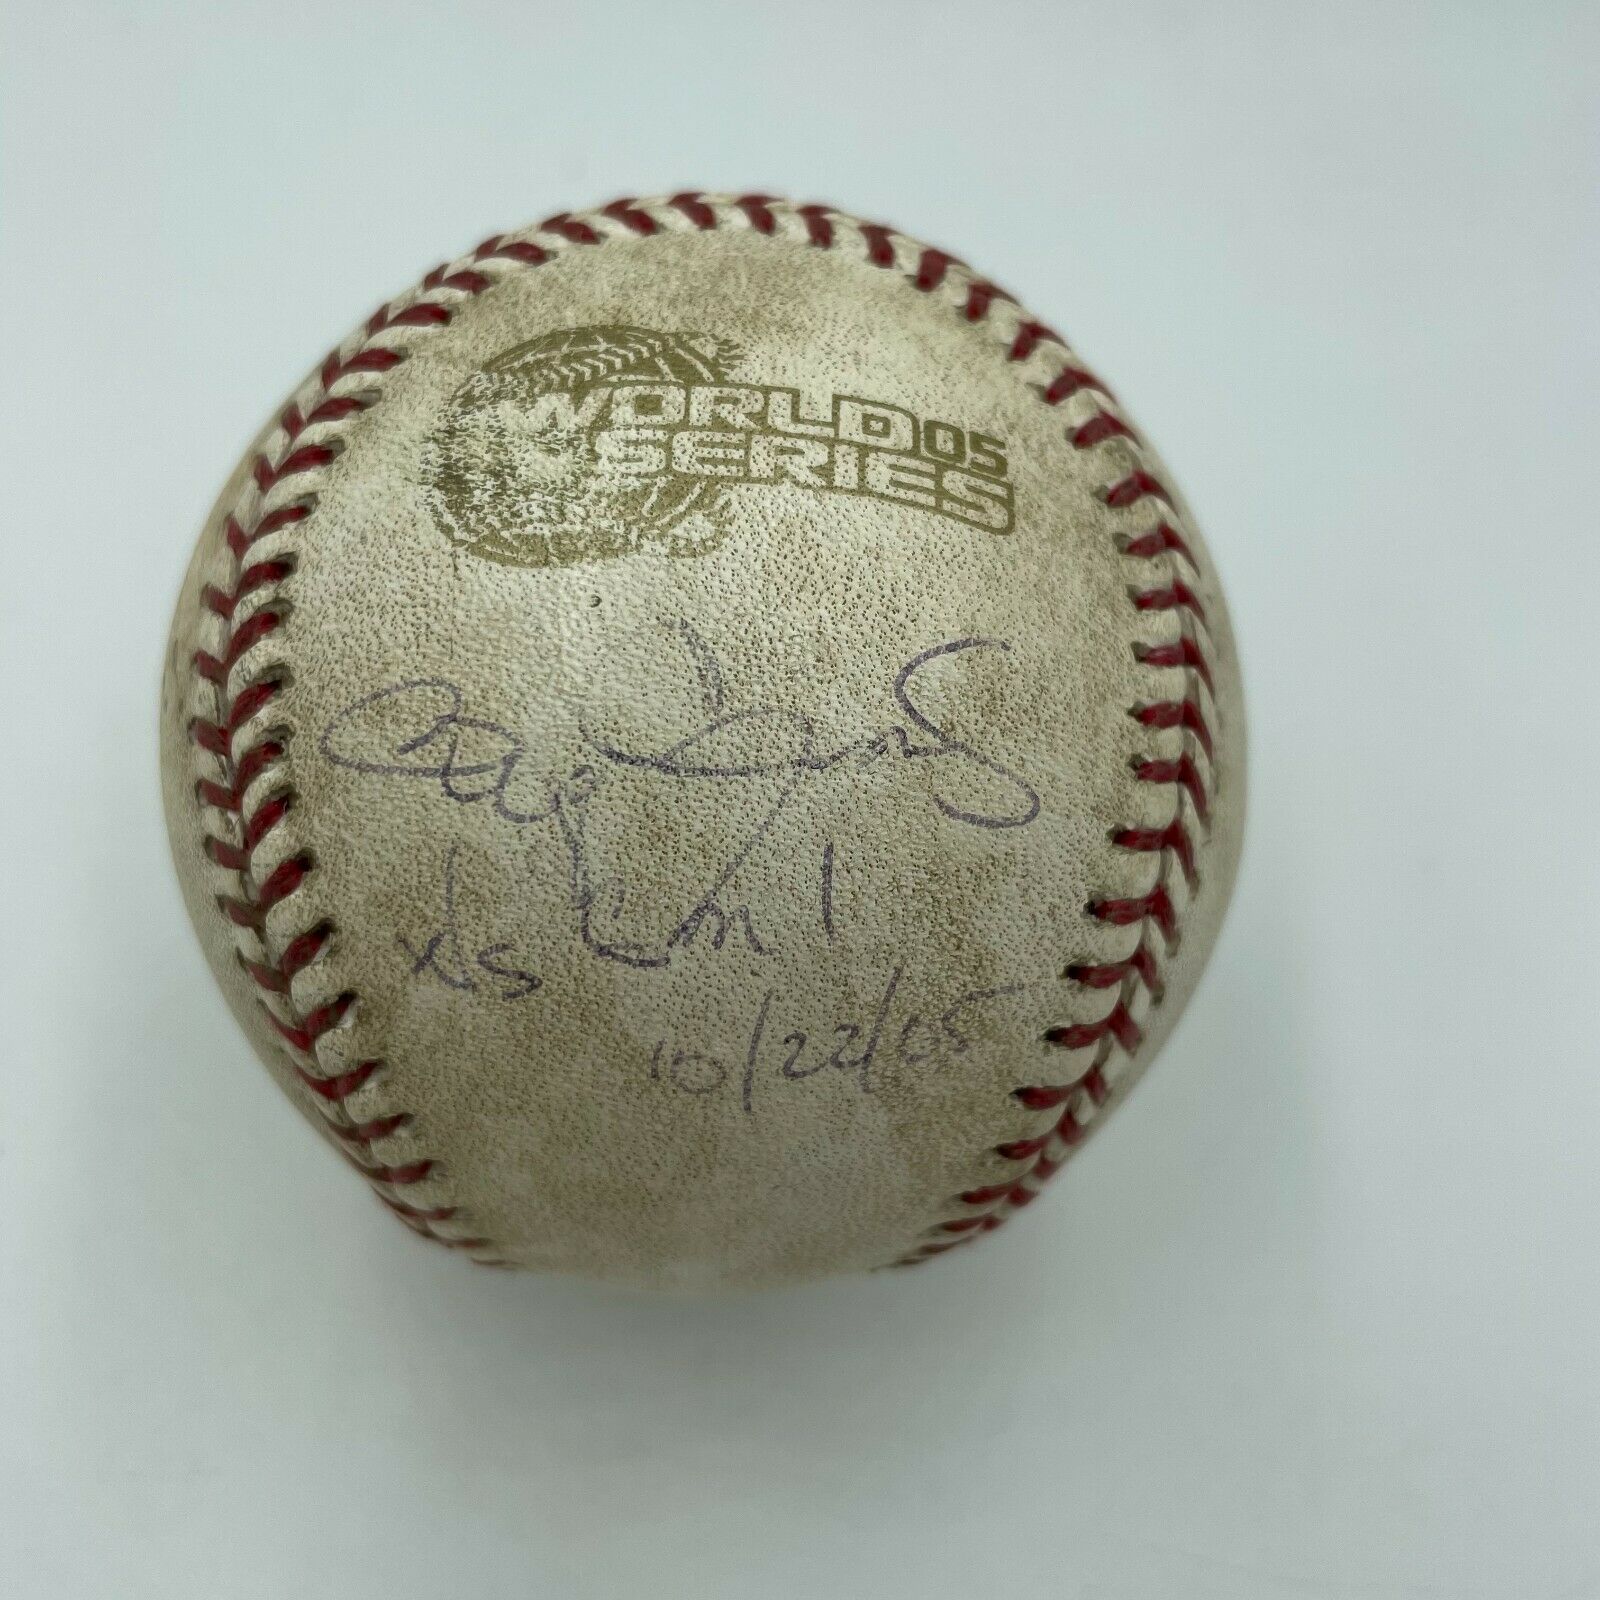 Roger Clemens Signed 2005 World Series Game 1 Game Used Baseball Tristar COA